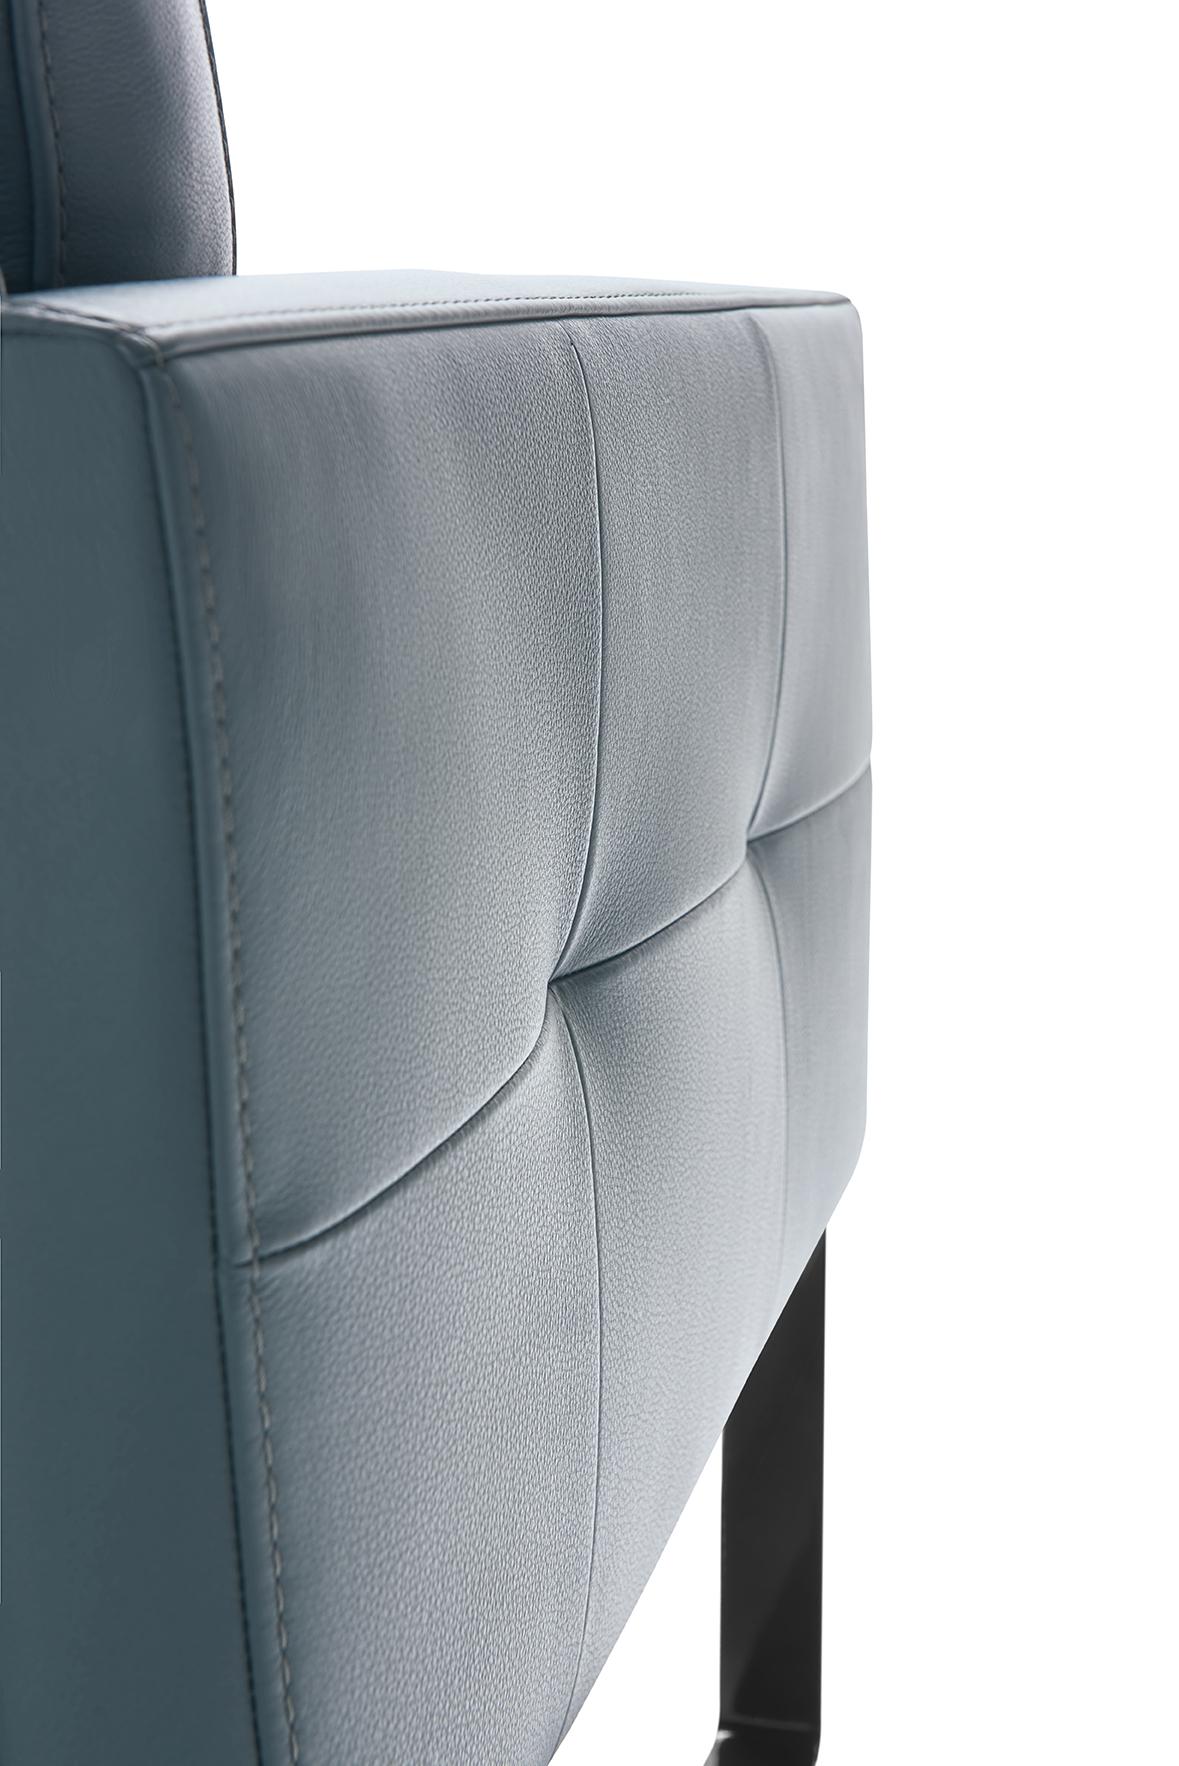 Slider Fauteuil IMPERIA (image 5)